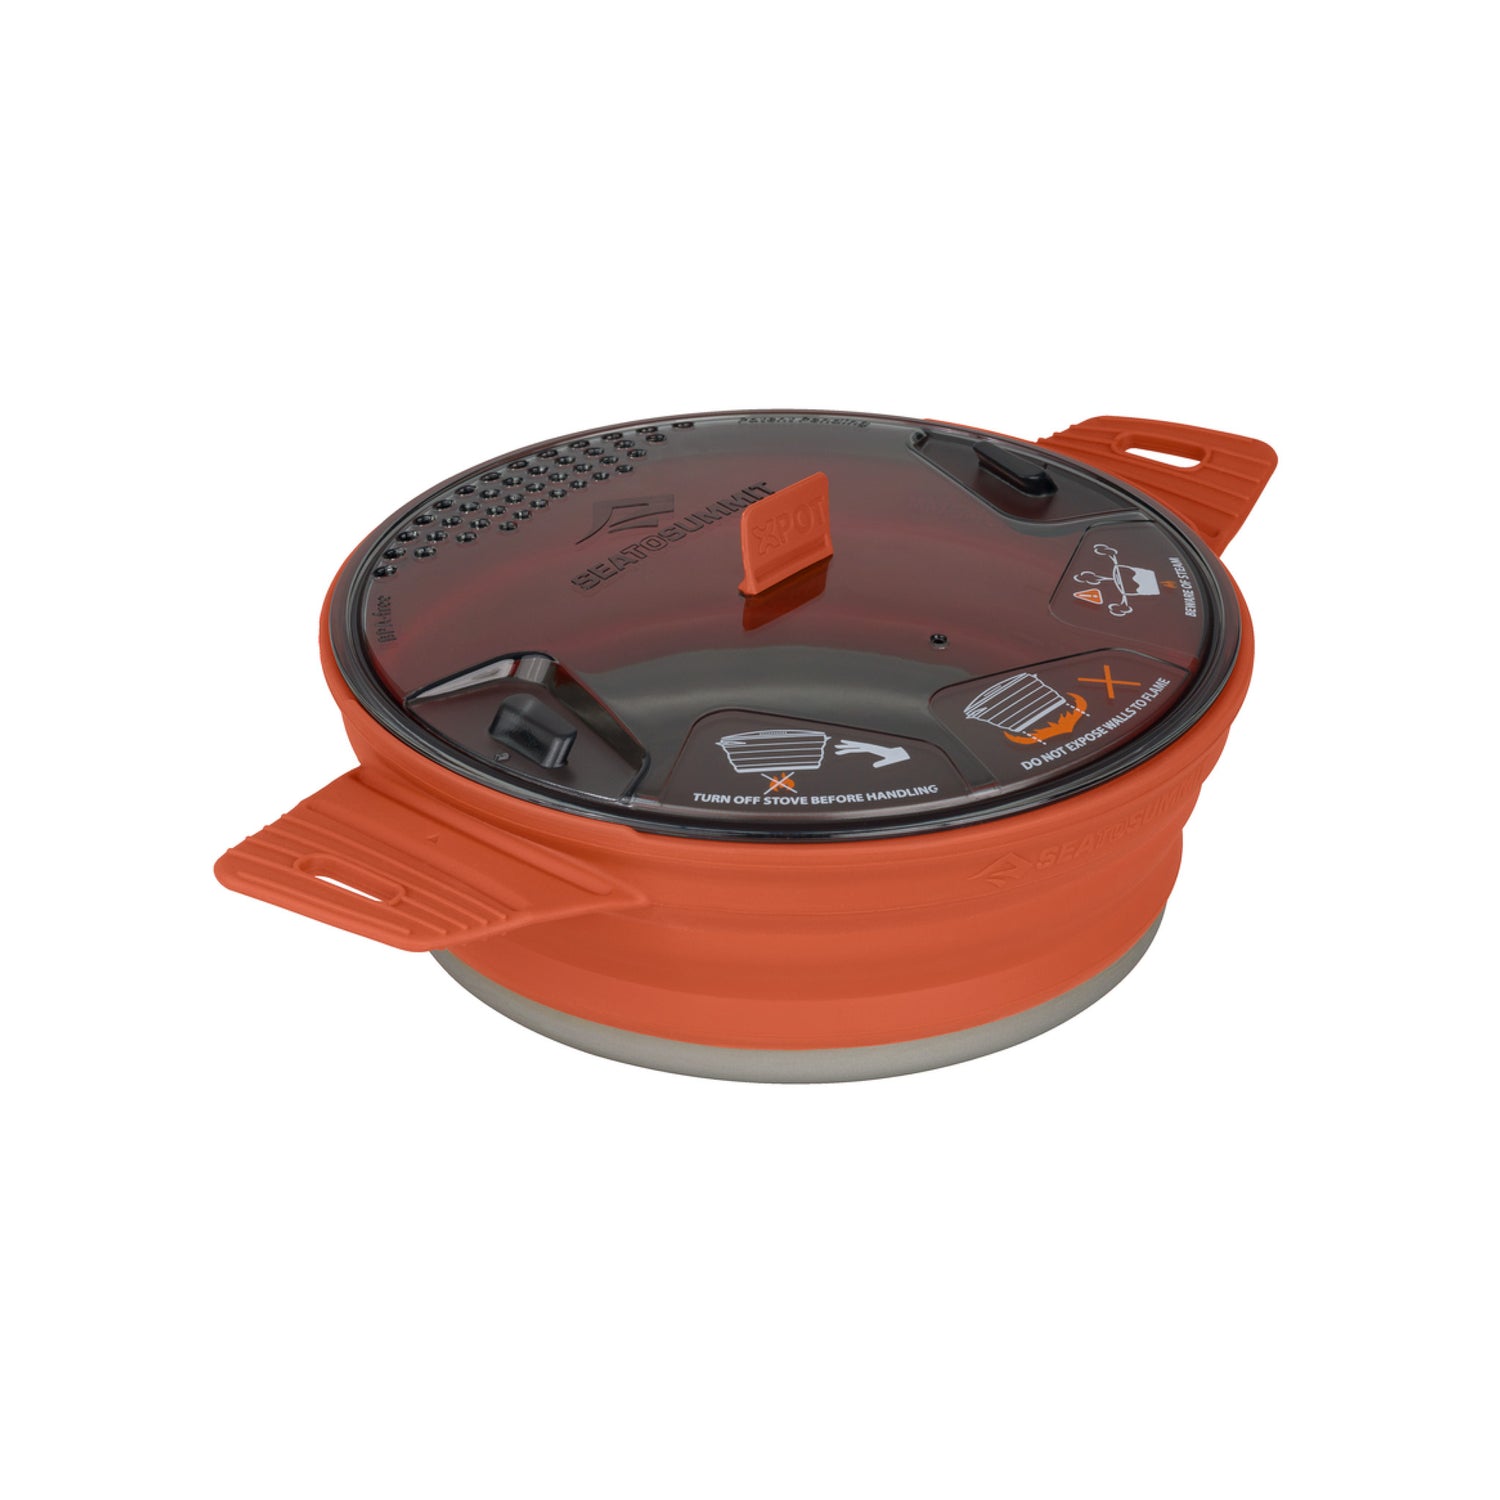  Collapsible Pots And Pans